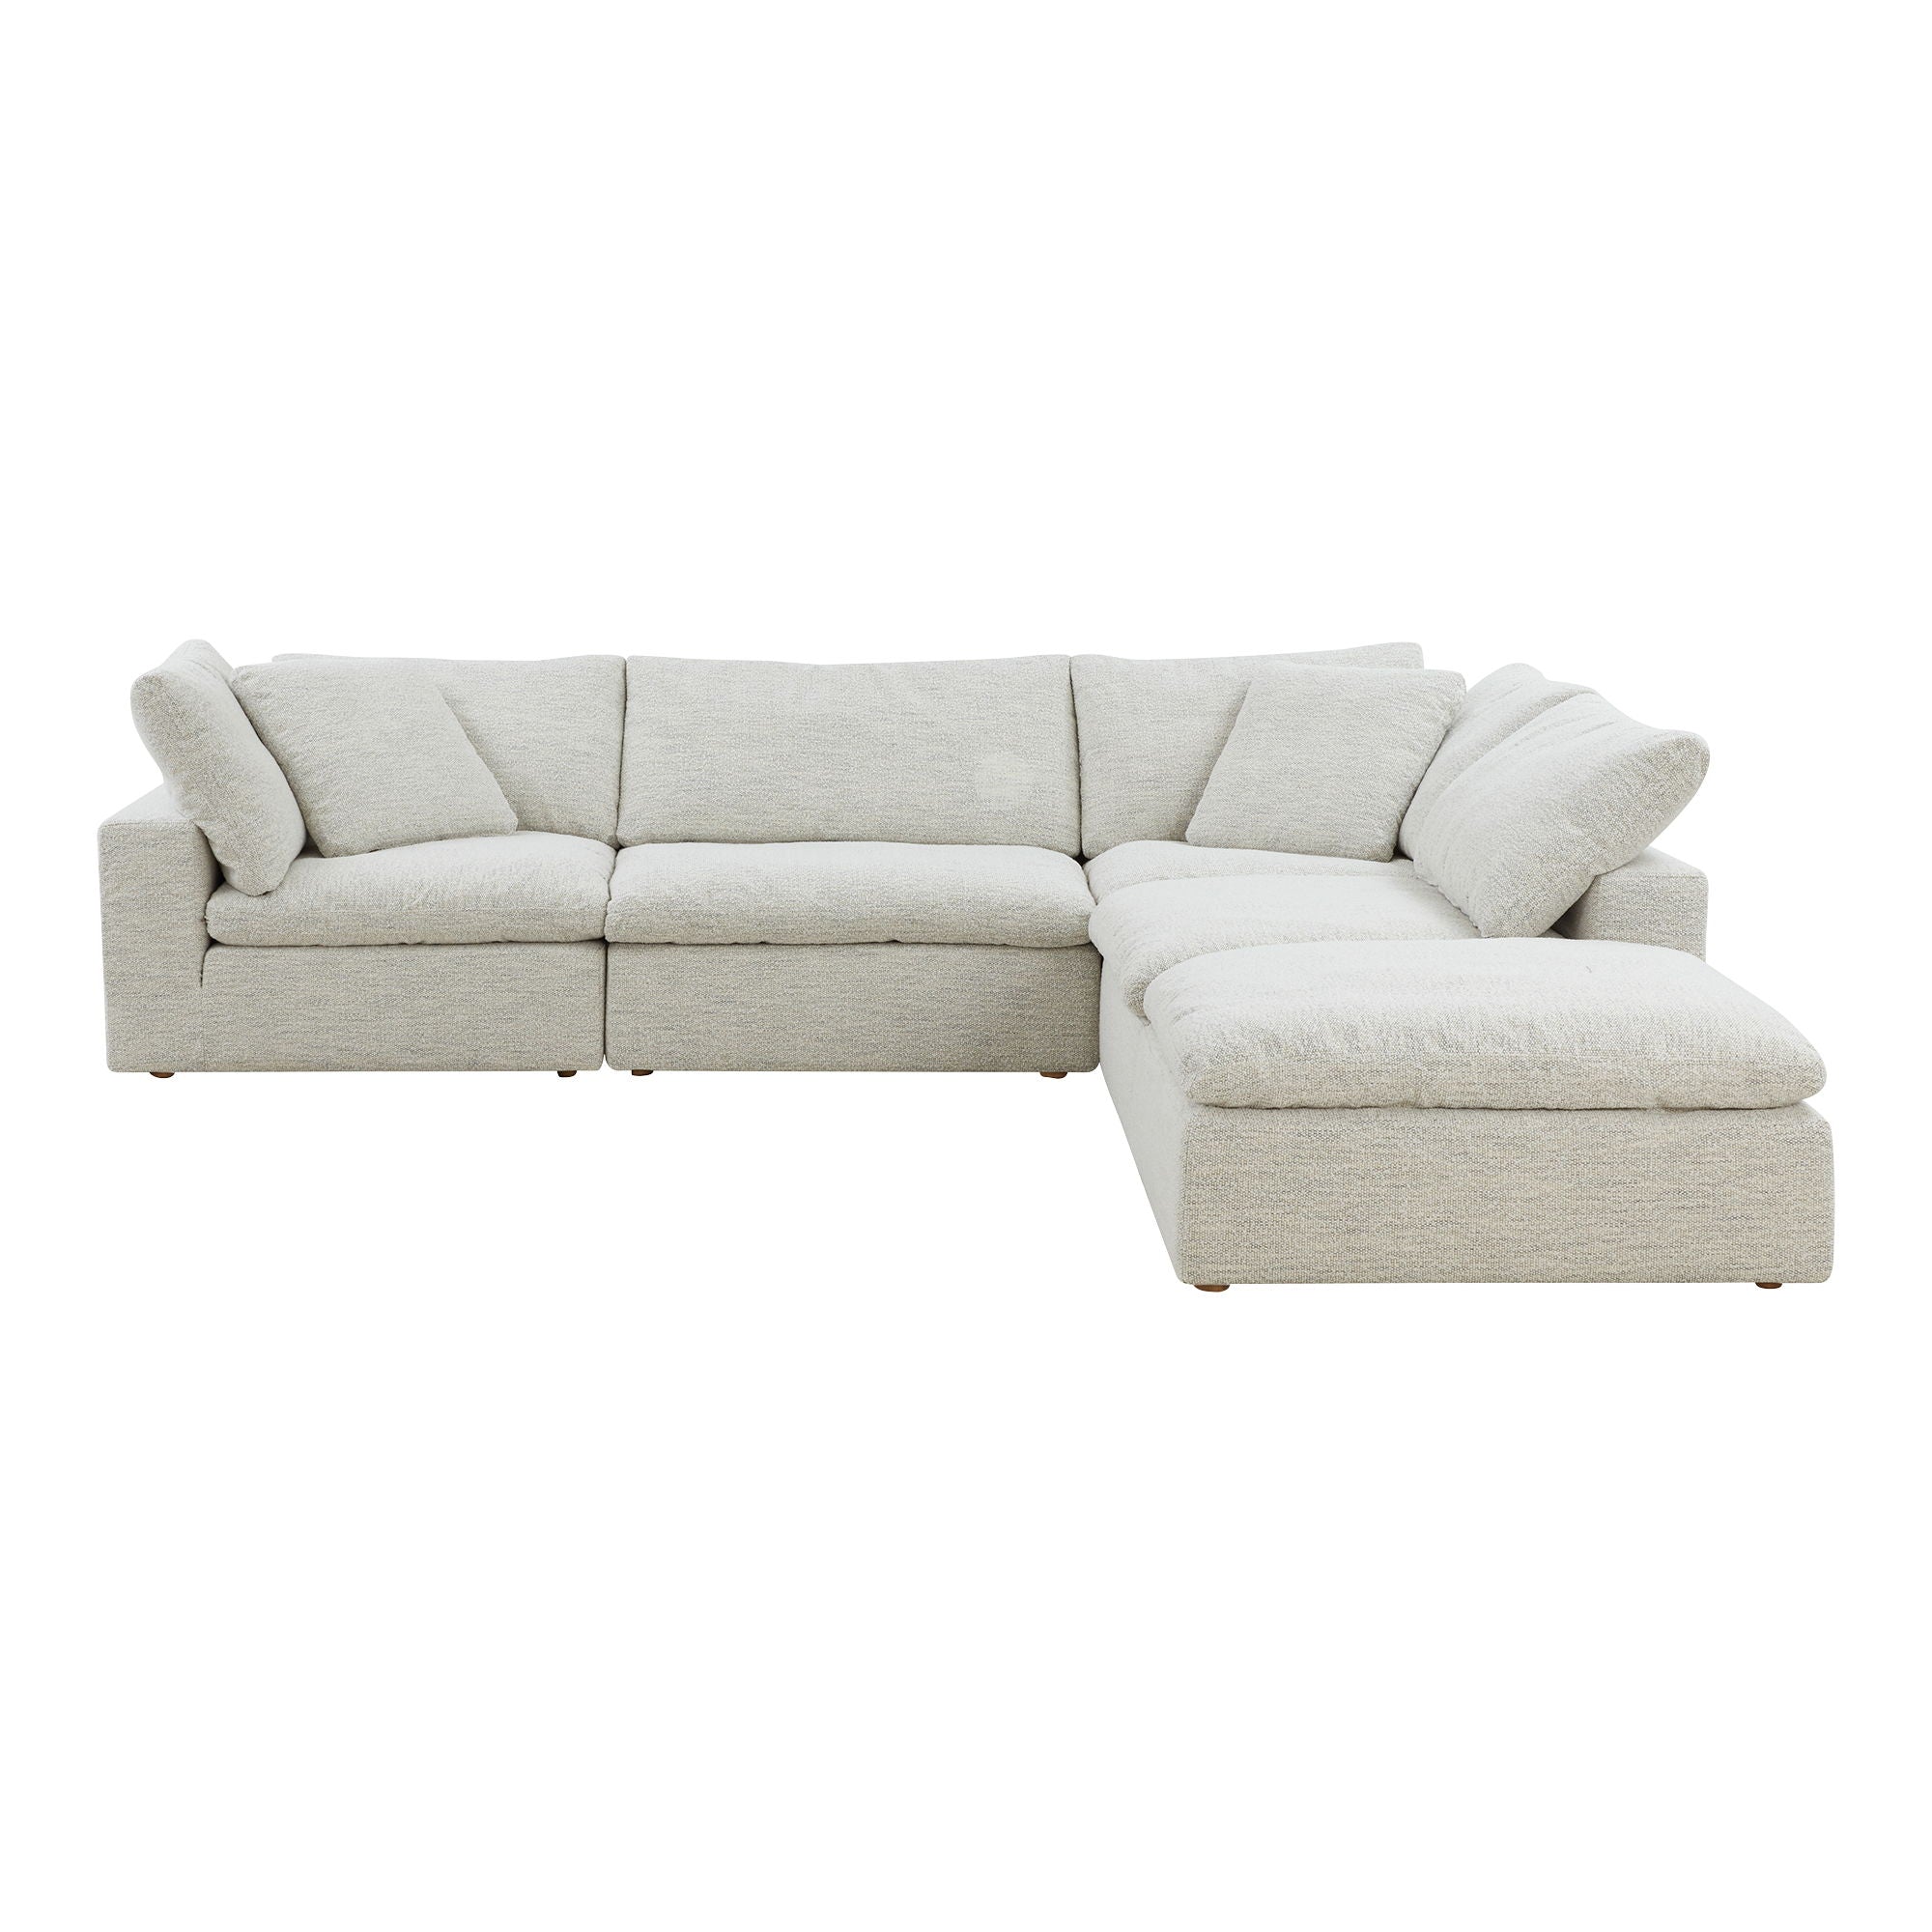 Clay Dream Modular Sectional - Coastside Sand, Stain-Resistant